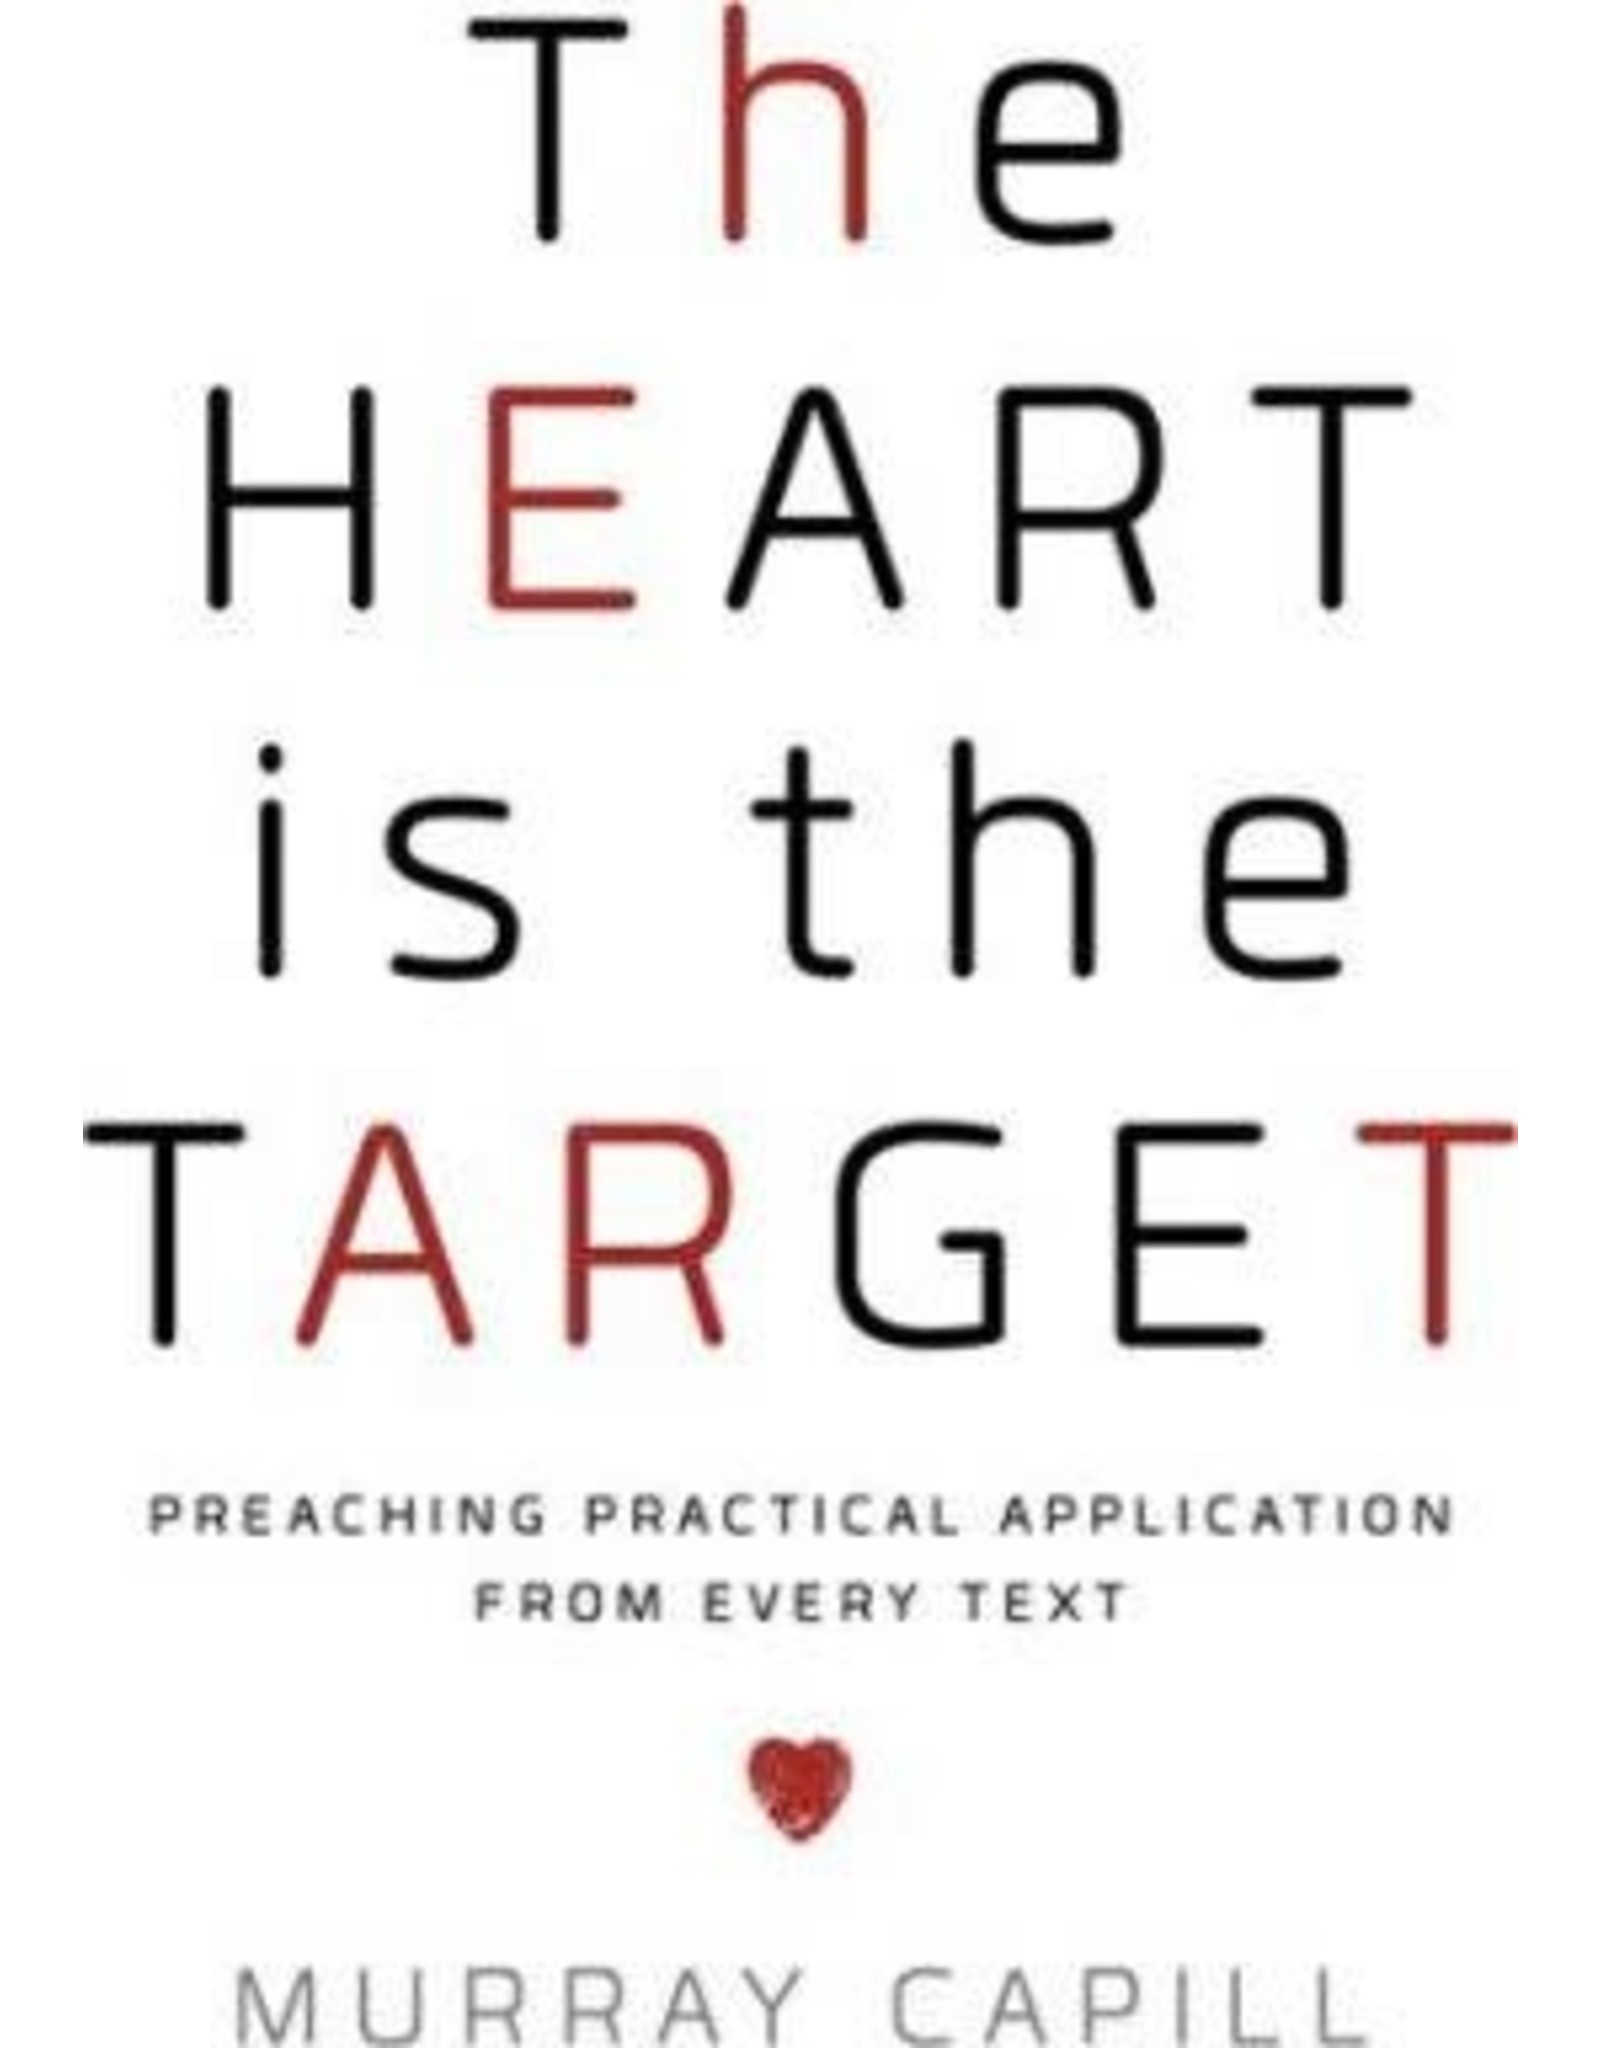 The Heart is the Target